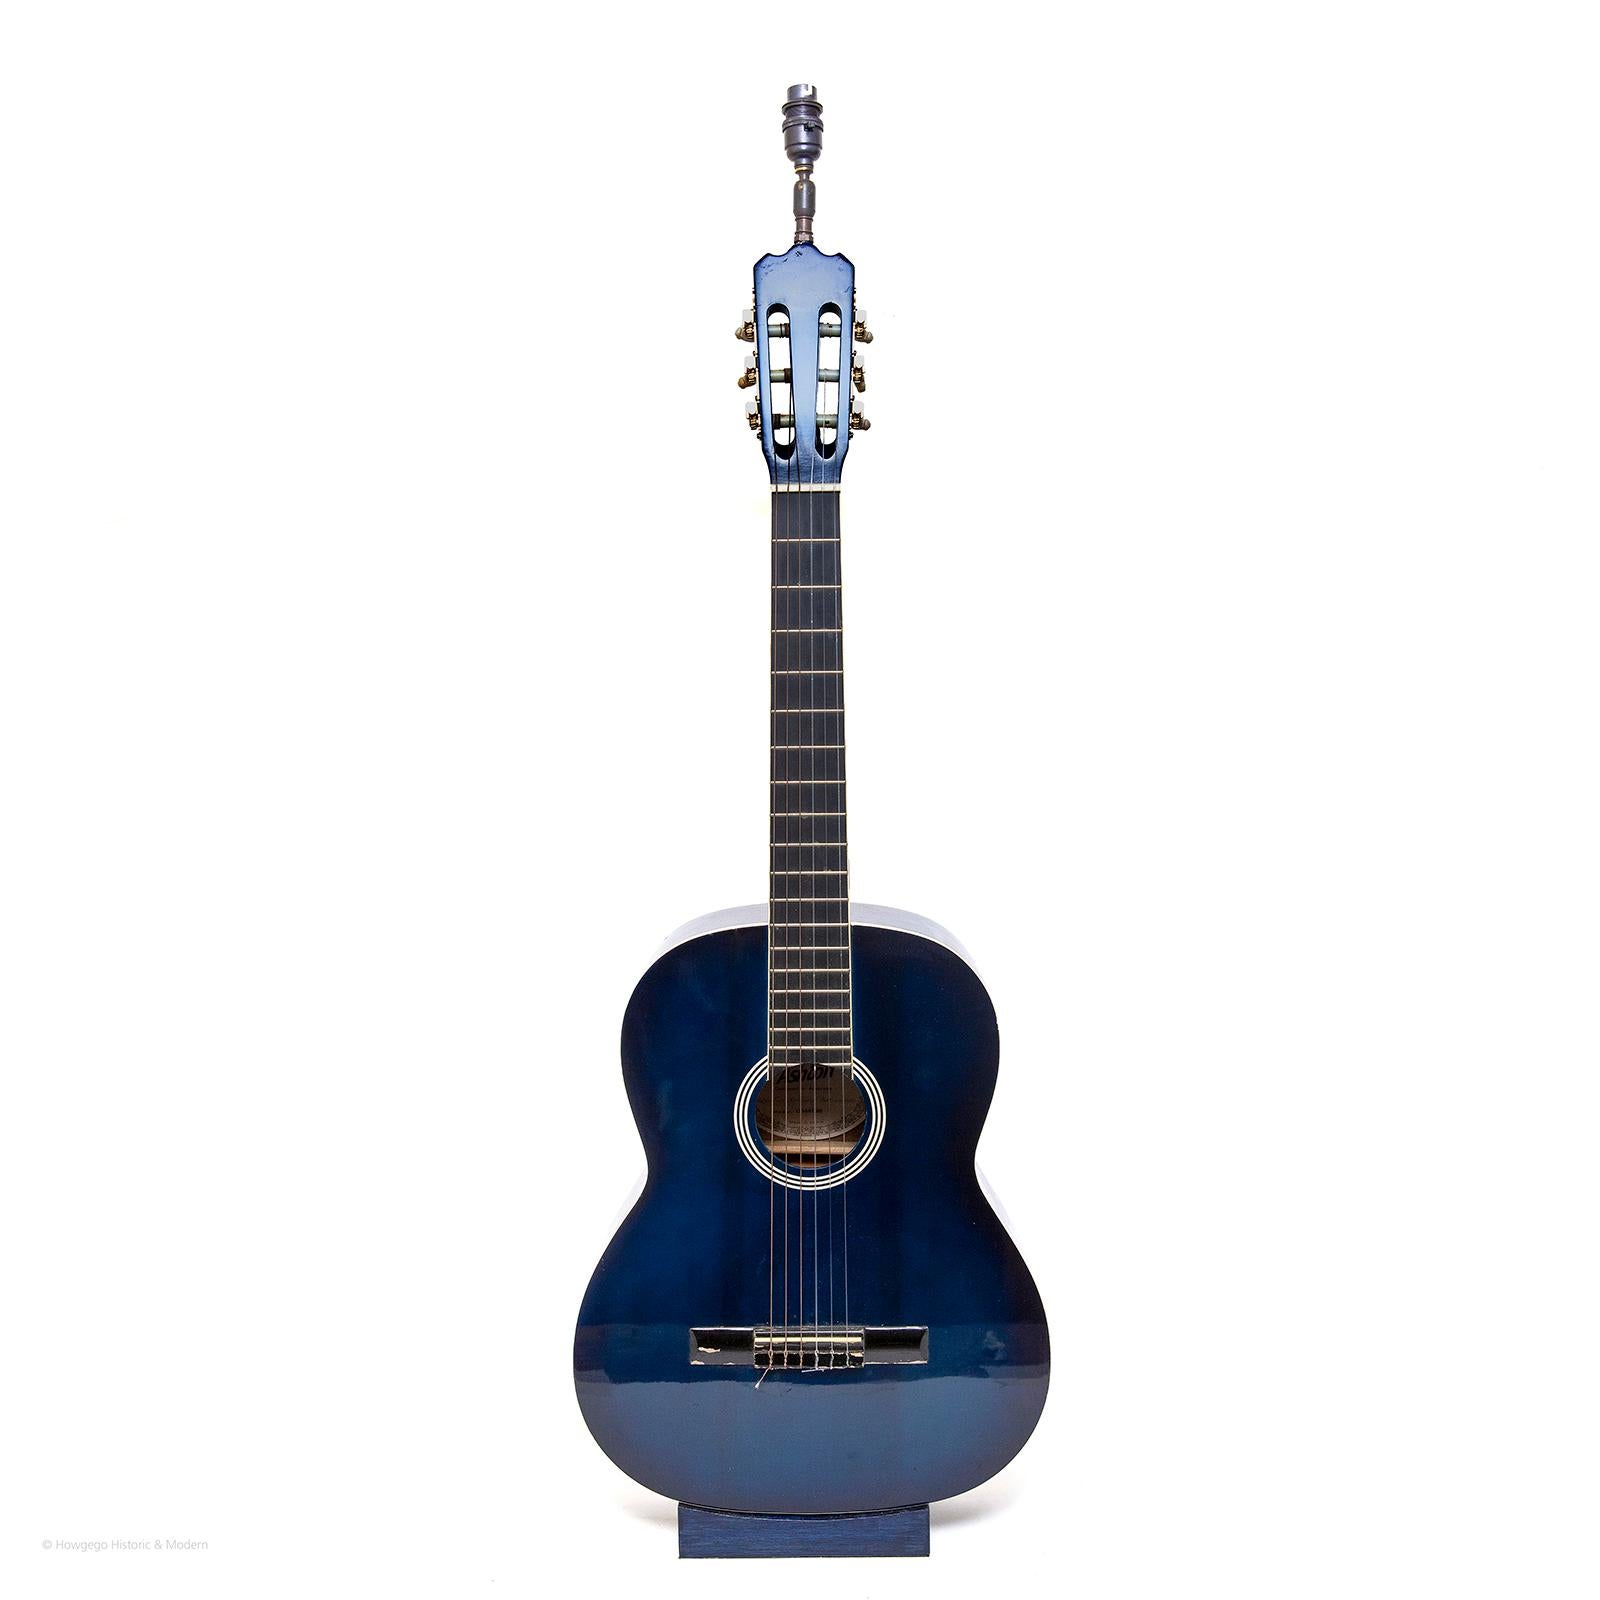 Ashton, CG44TBB vintage, blue with off-white detailing, classical, acoustic guitar upcycled into a table lamp, 34